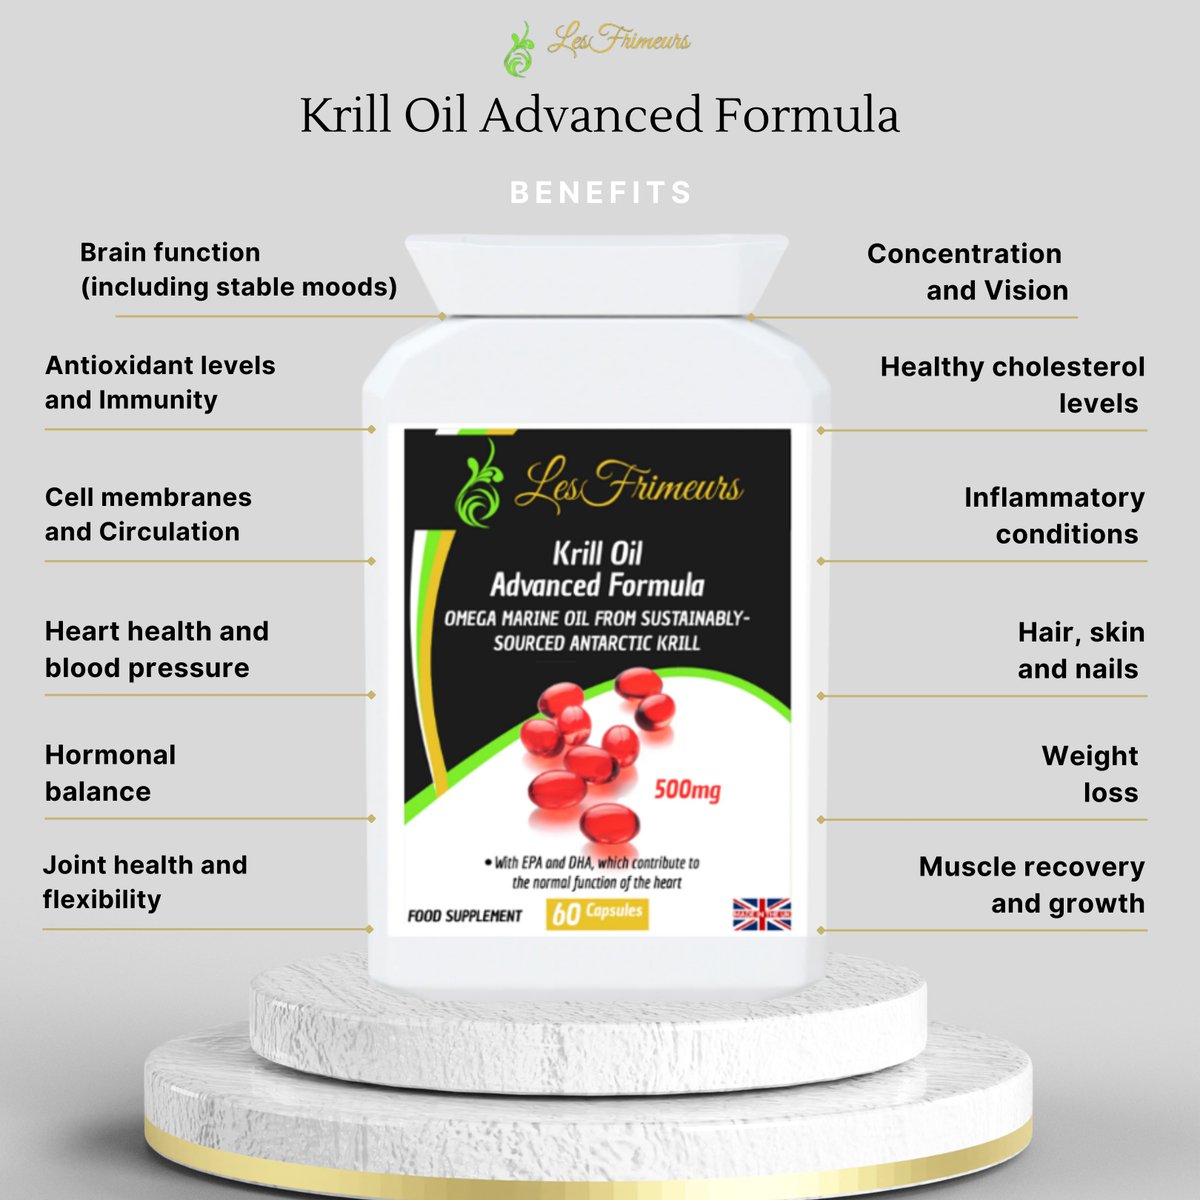 Krill oil advanced. #lesfrimeurs #doctorsays
#Brainfunction #Antioxidantlevels #Immunity #Hearthealthandbloodpressure #Circulation #Hormonalbalance #jointhealthandflexibility #Concentration #Inflammatoryconditions #Hairskinnails #Weightloss #Musclerecovery